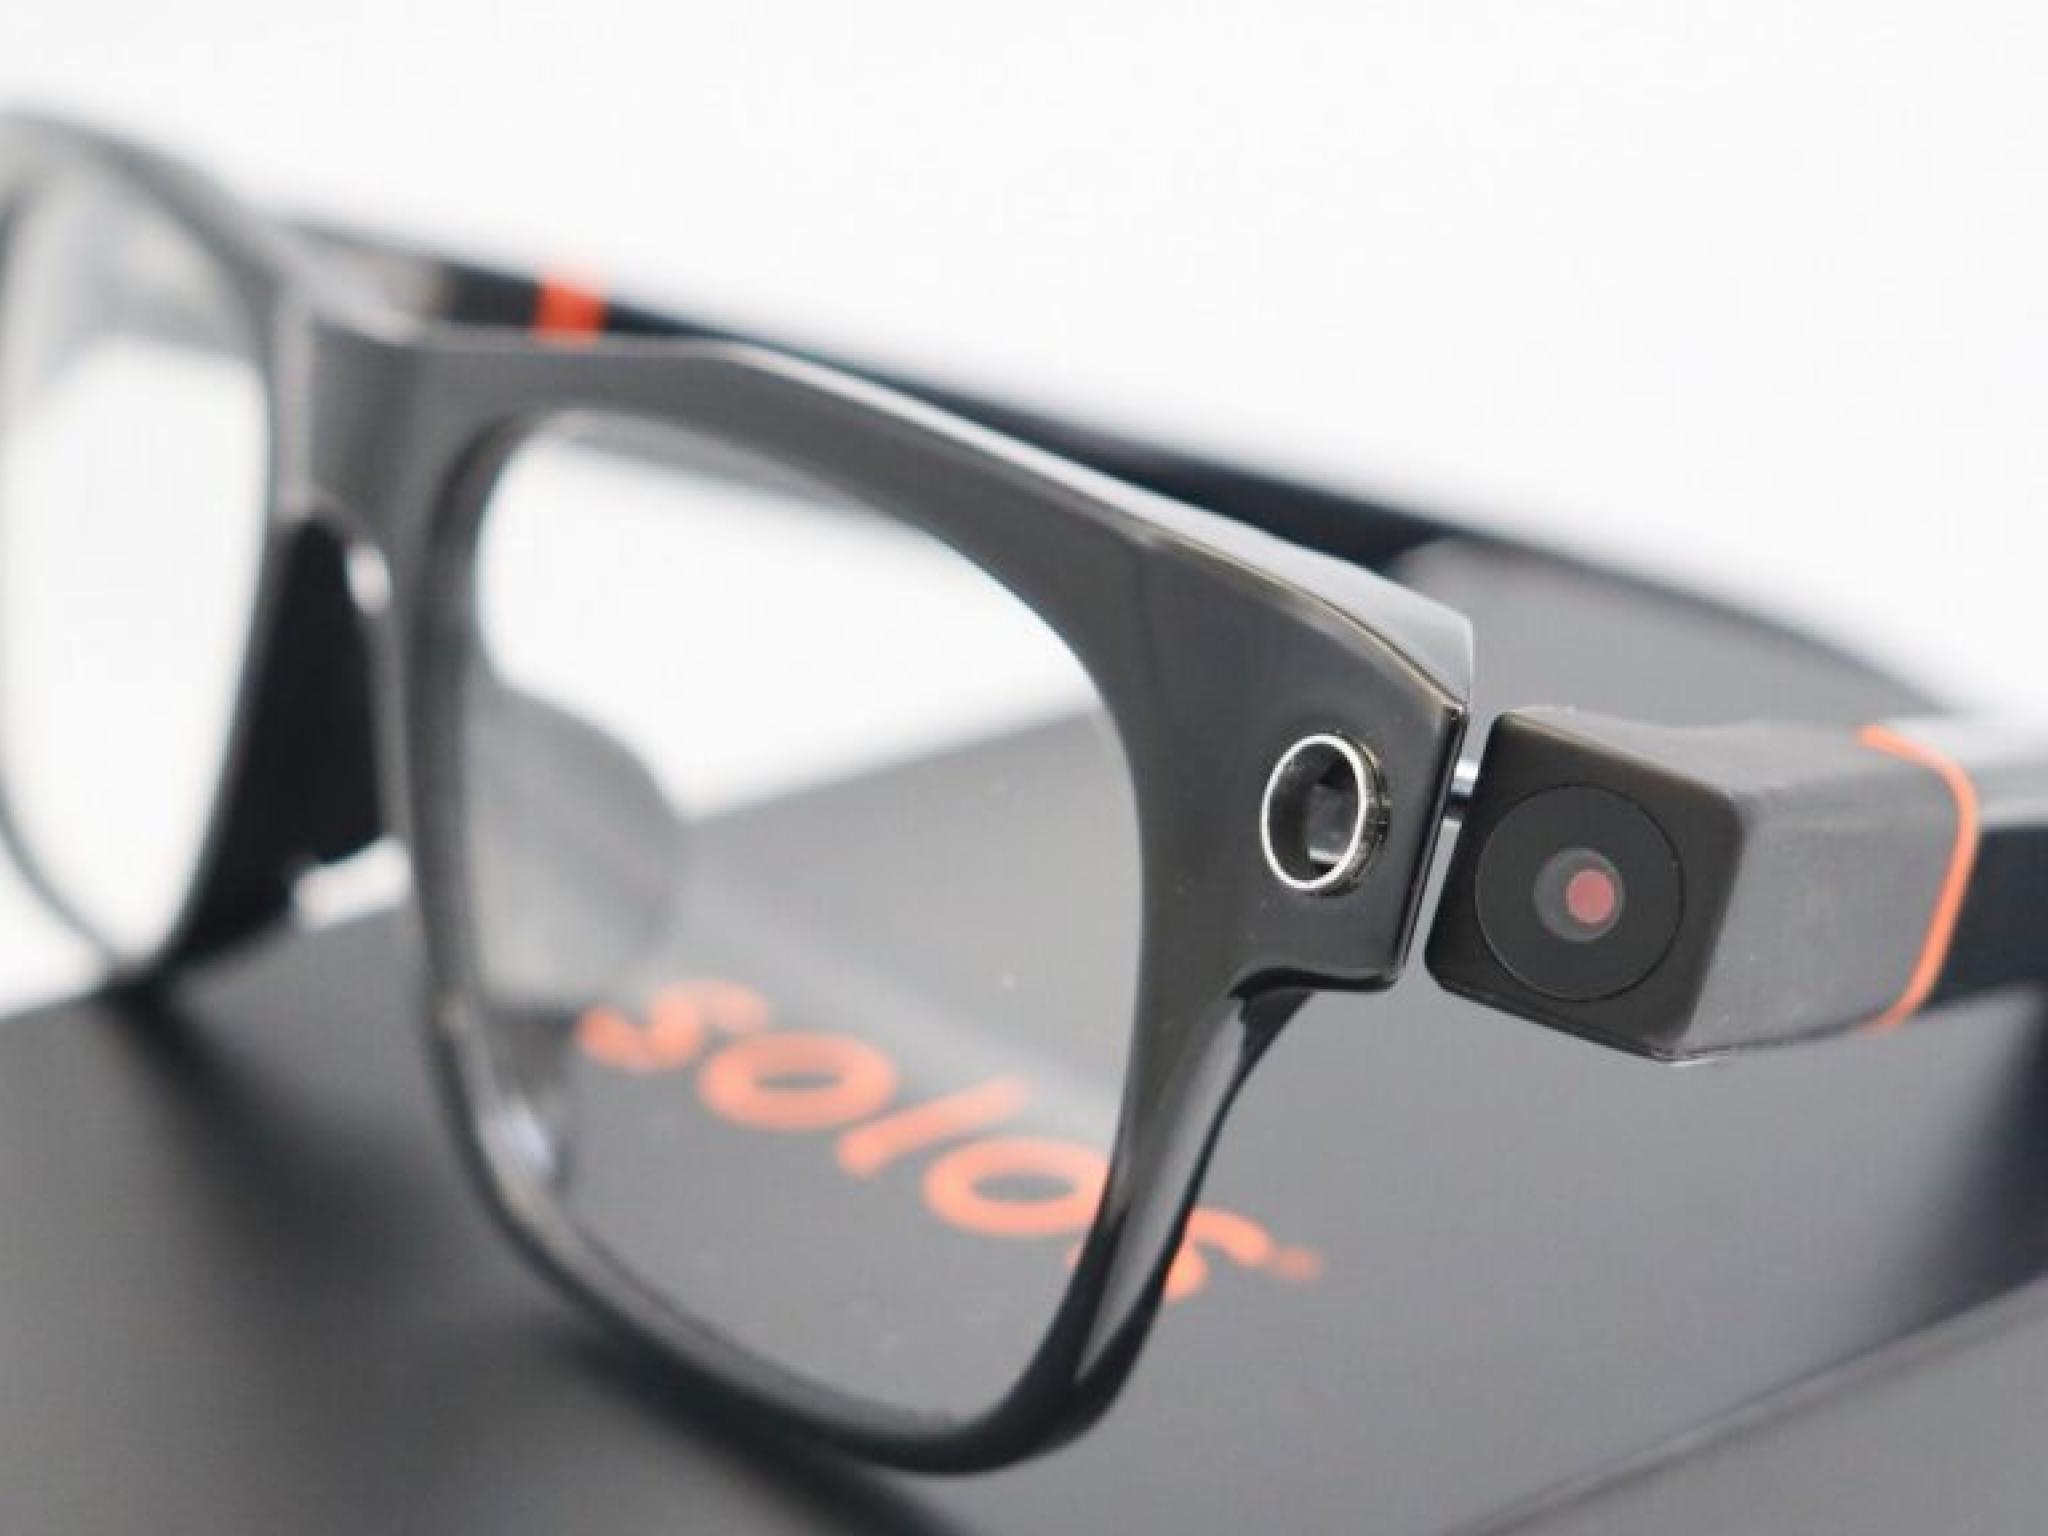  metas-ray-ban-smart-glasses-face-new-rival-powered-by-openais-chatgpt 